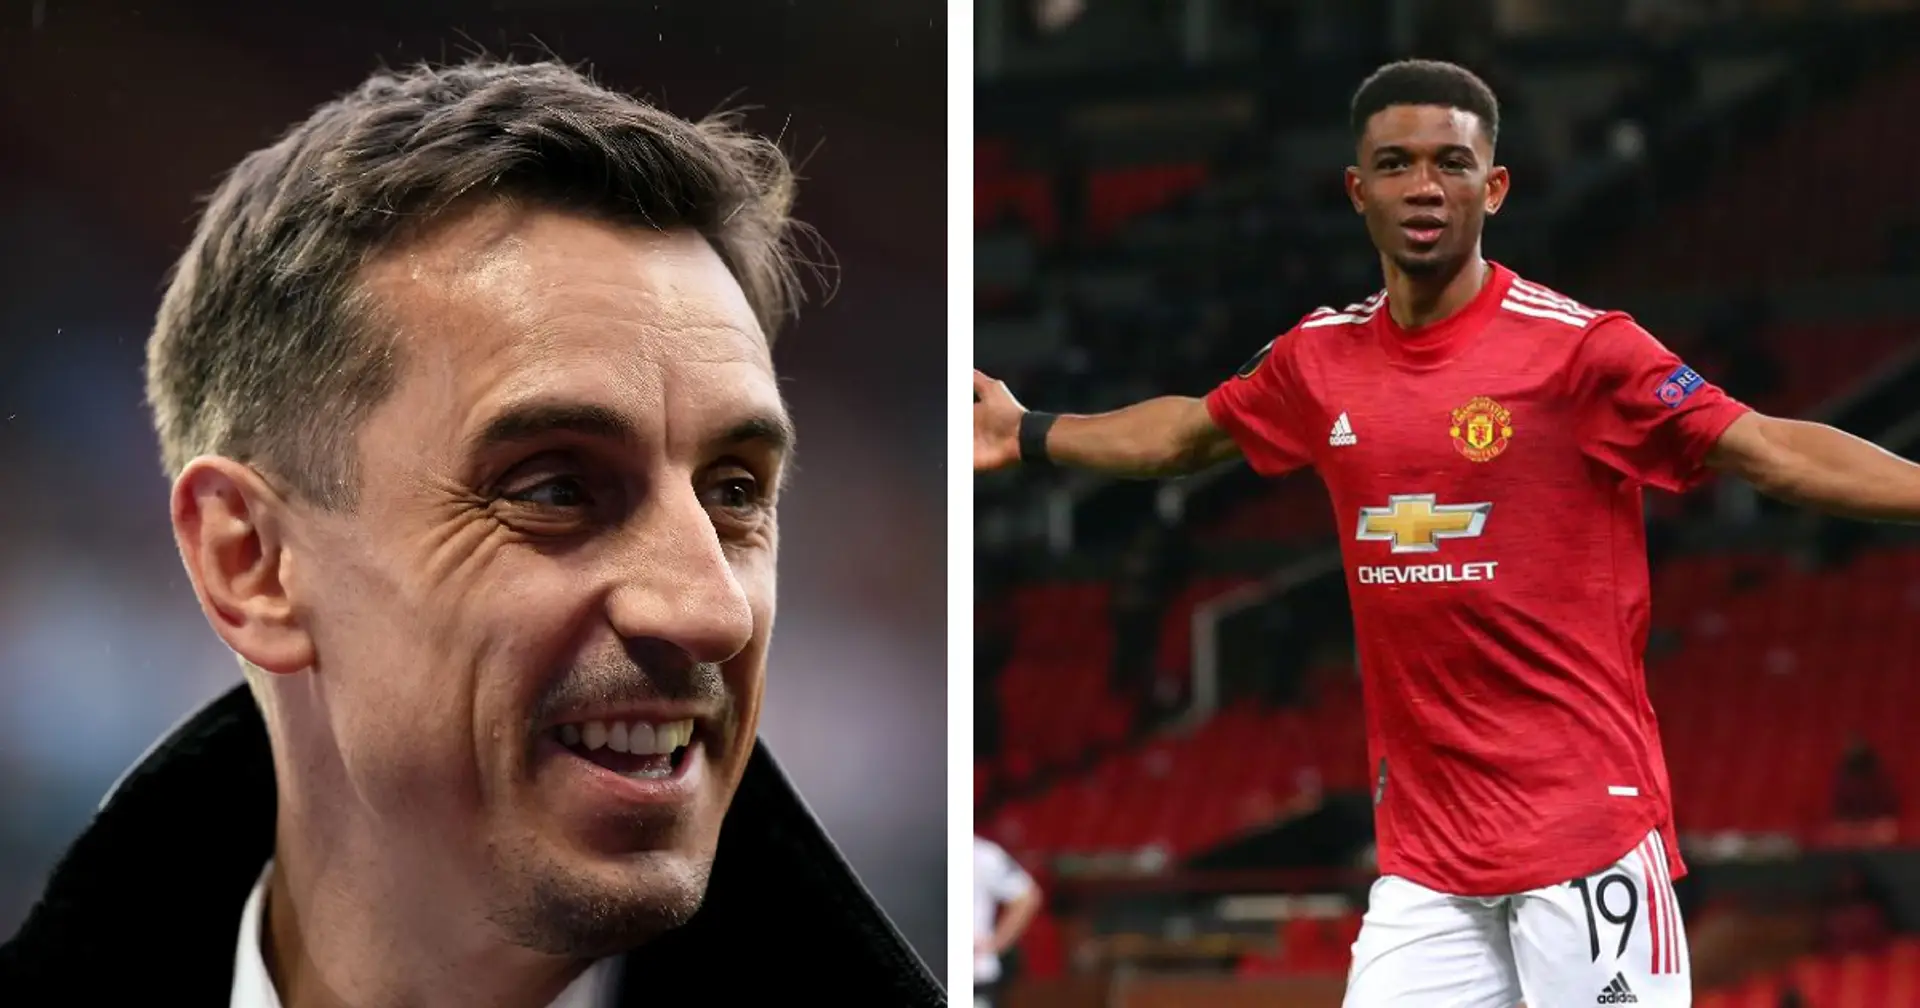 Gary Neville's three-word reaction to Amad Diallo's performance vs AC Milan says it all